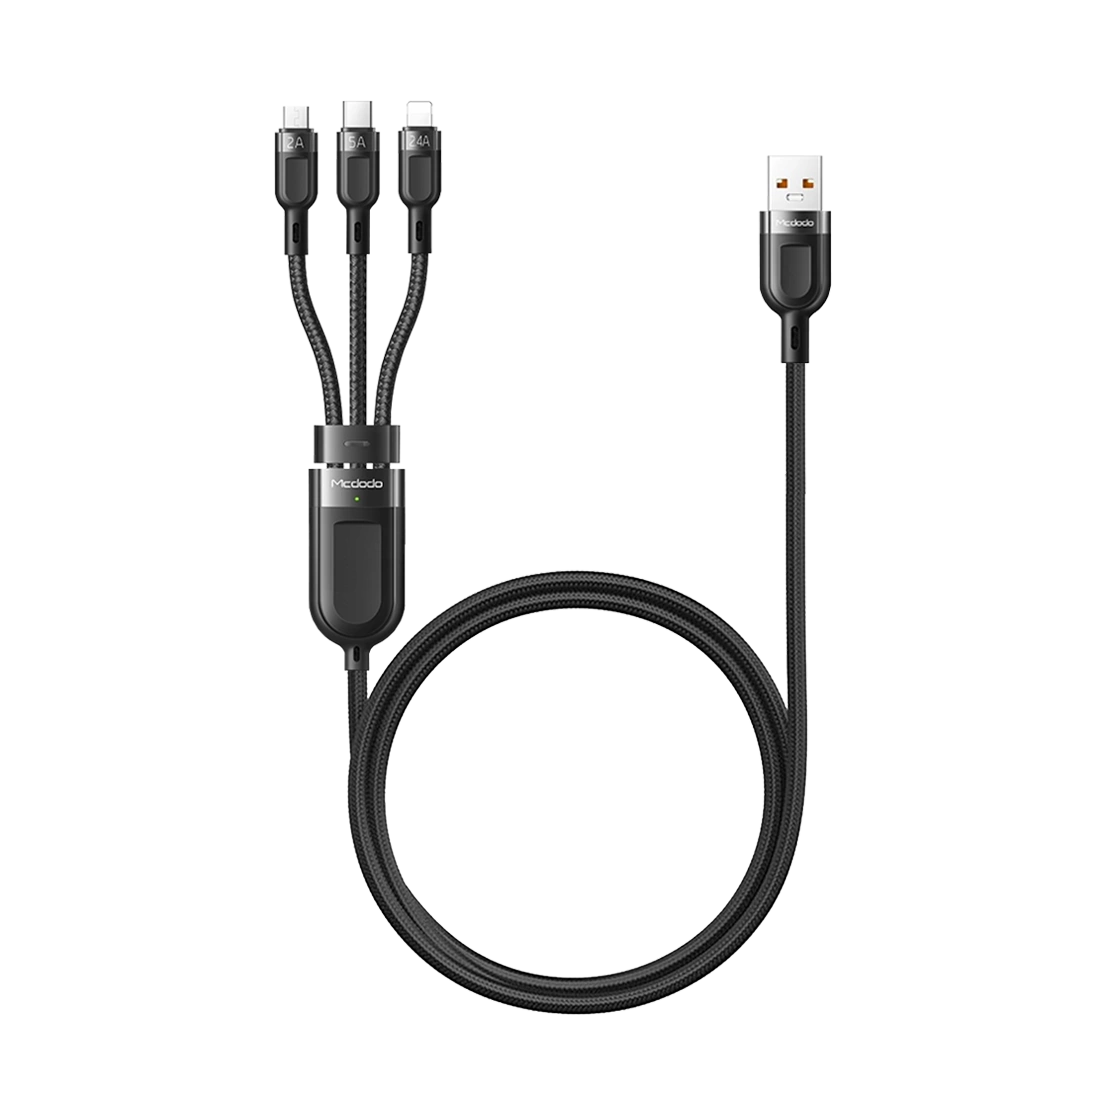 mcdodo-fast-charger-cable-3-in-1-120cm-ca-8790